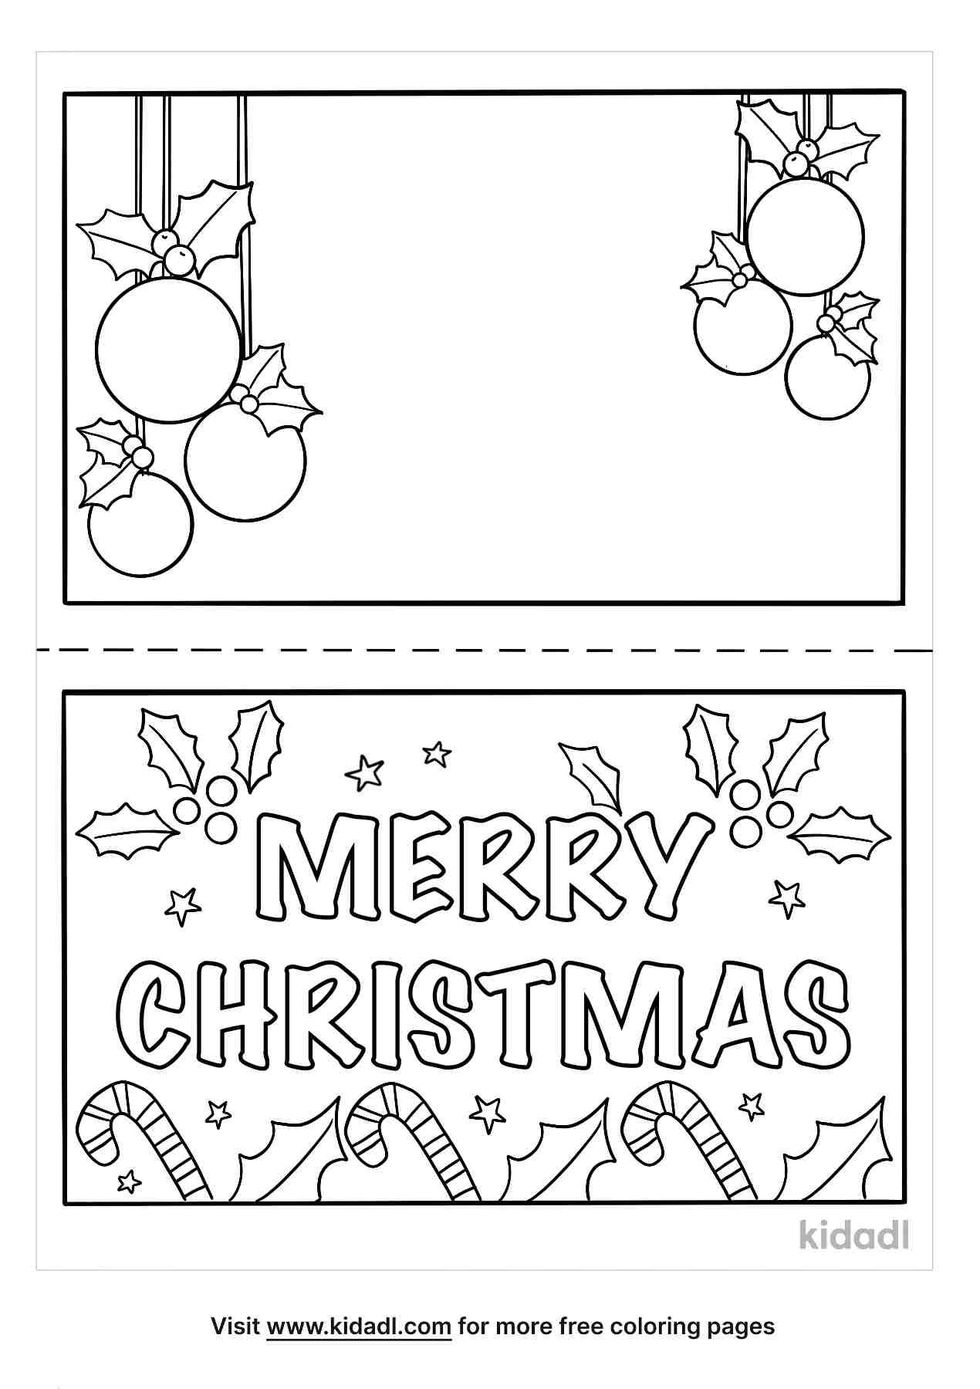 Merry Christmas card coloring page for kids.